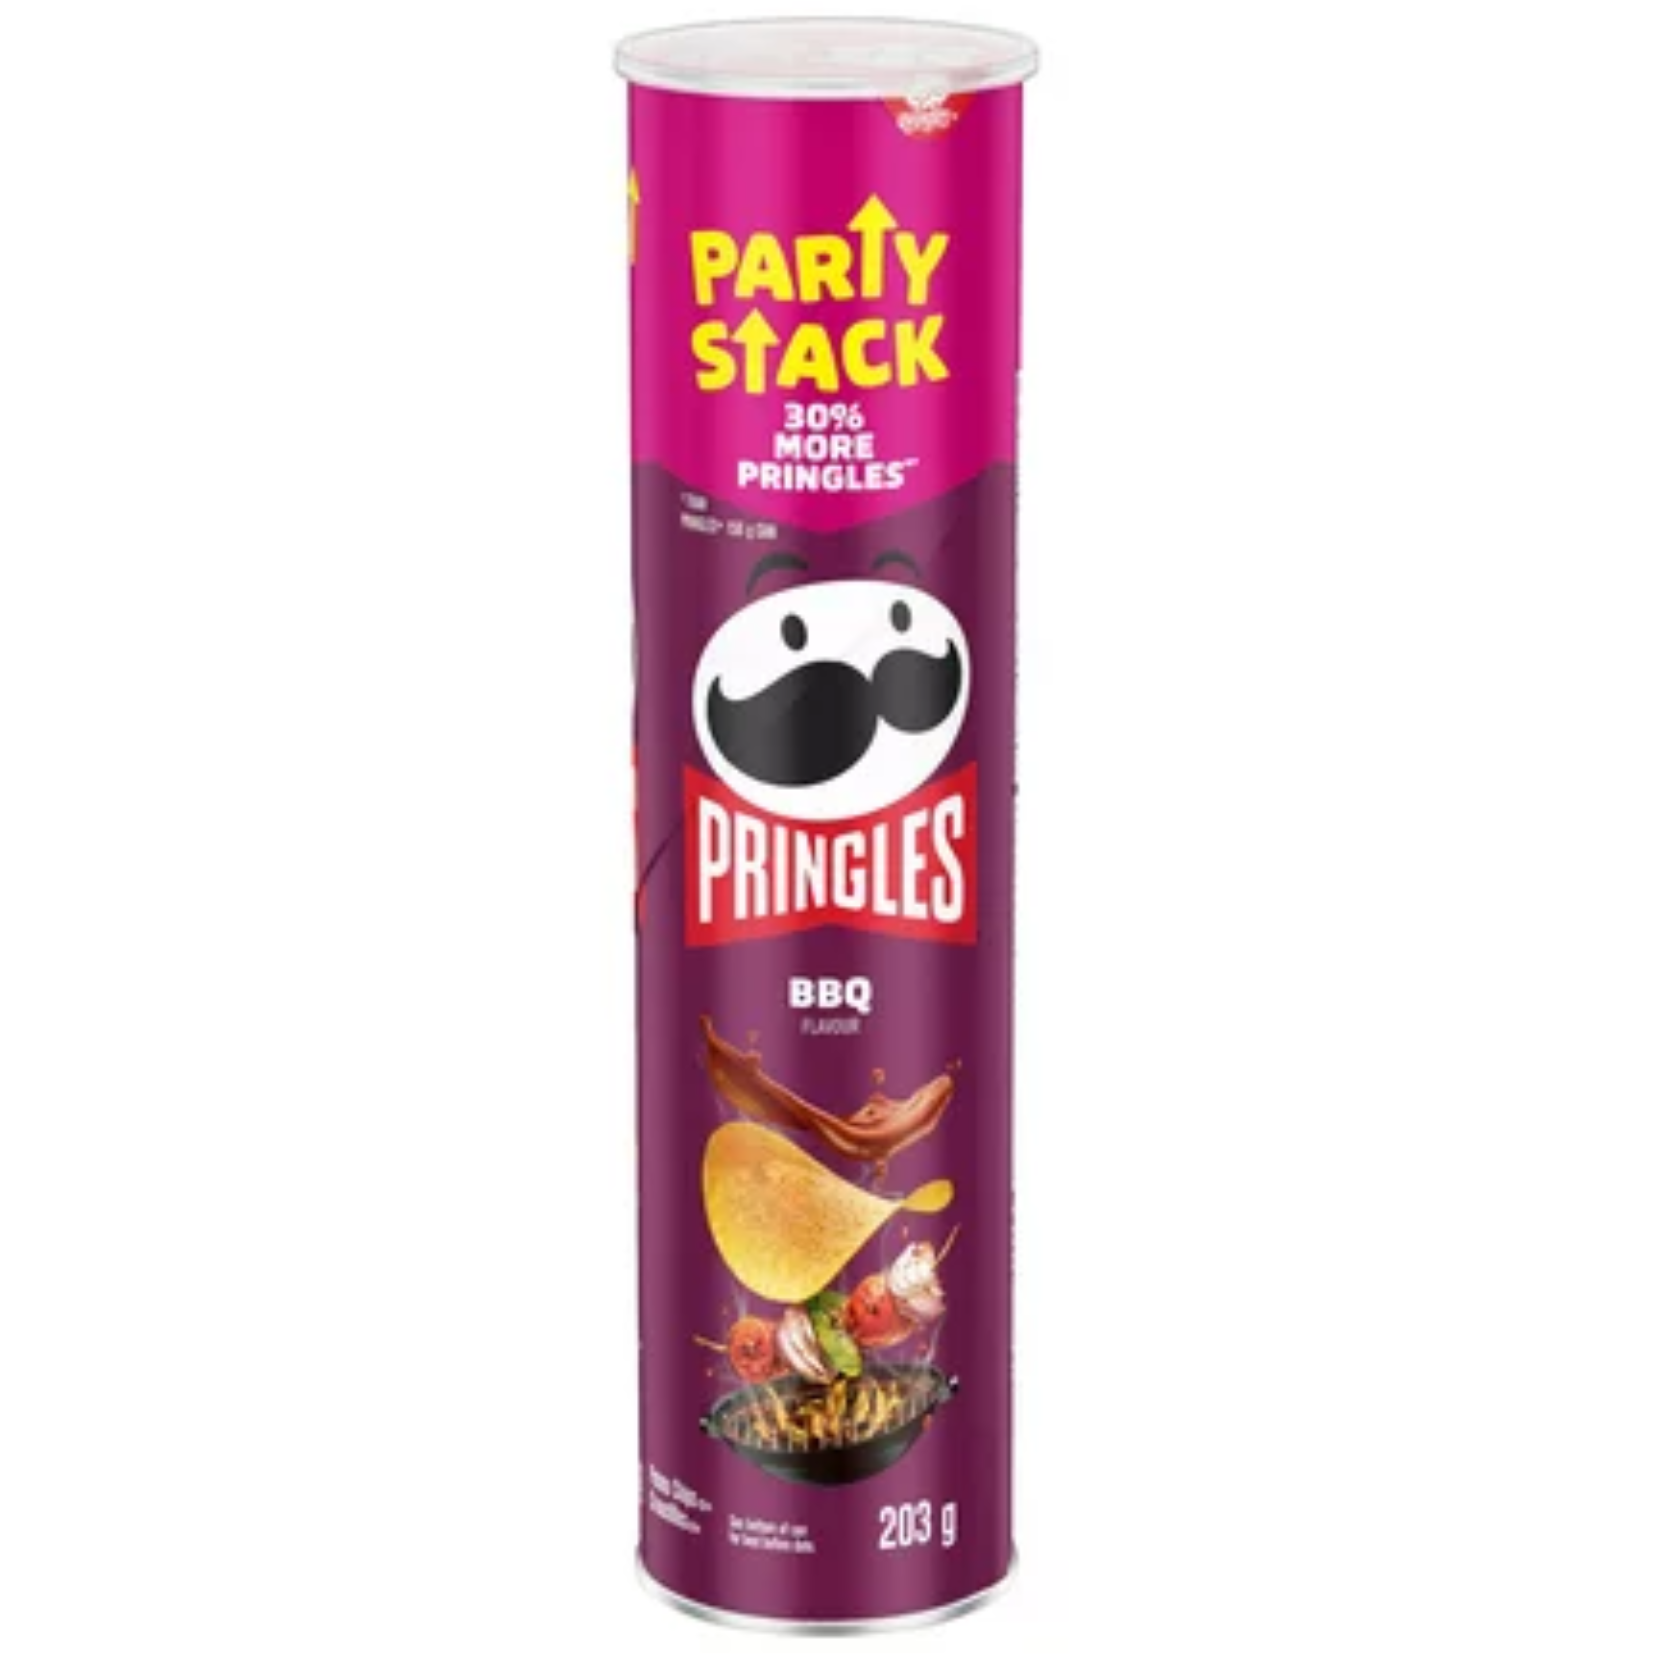 Pringles Party Stack Barbecue Chips 203g